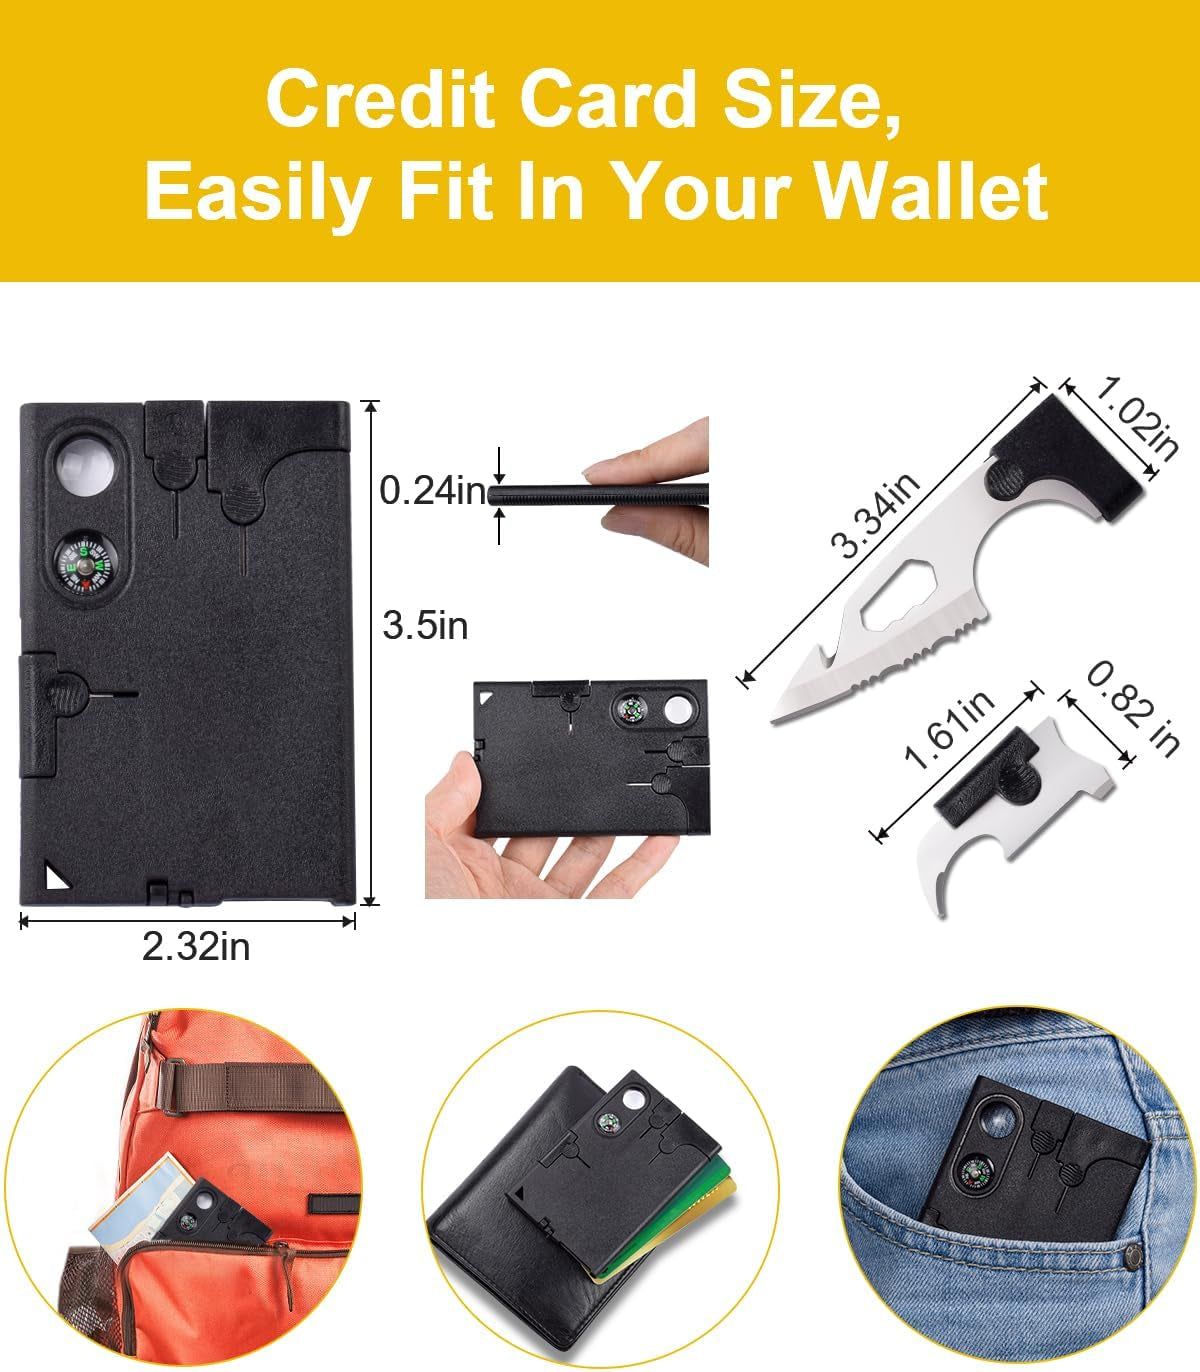 Upgraded Credit Card Tool Multitool - Christmas Stocking Stuffers 18 in 1 Multi-Tool Cool Gadgets Birthday Gifts for Adult Men Women Wallet Tools With Blade Compass Screwdrivers